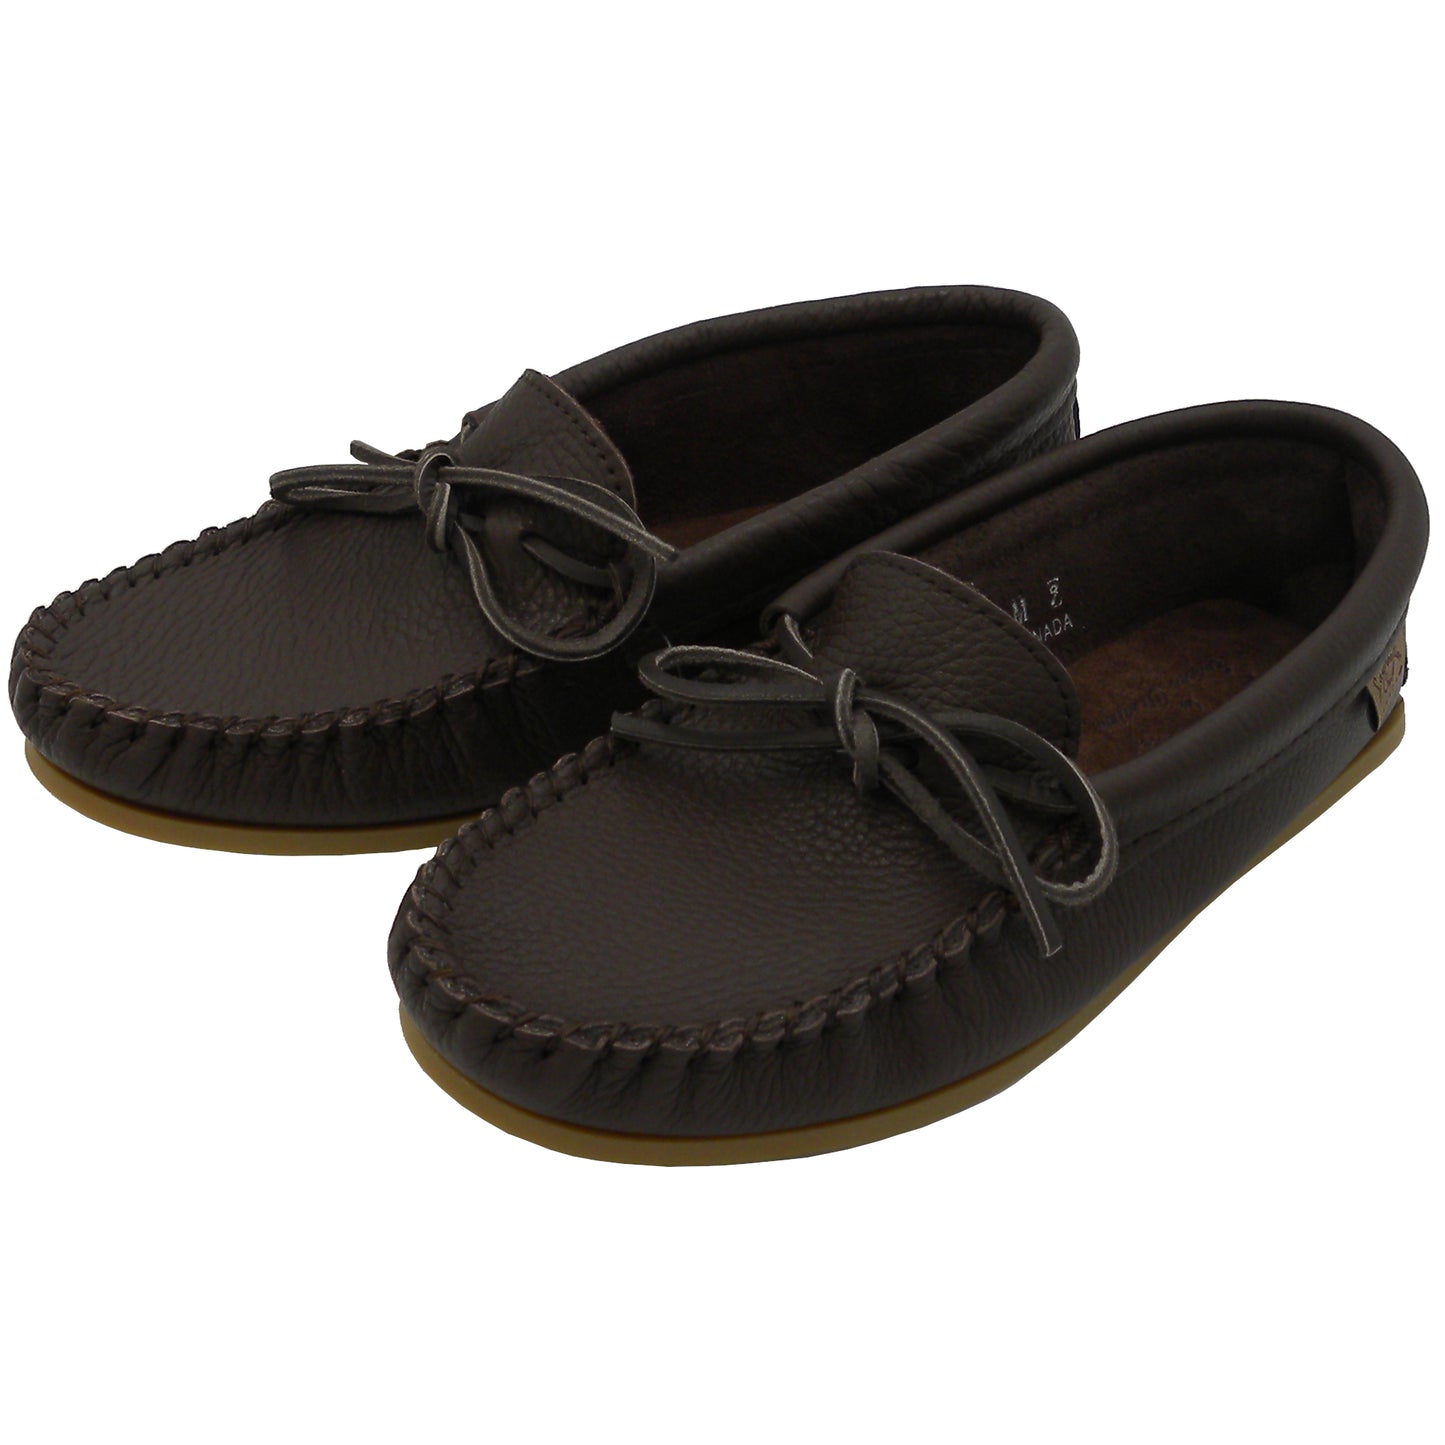 Rubber Sole Leather Moccasins